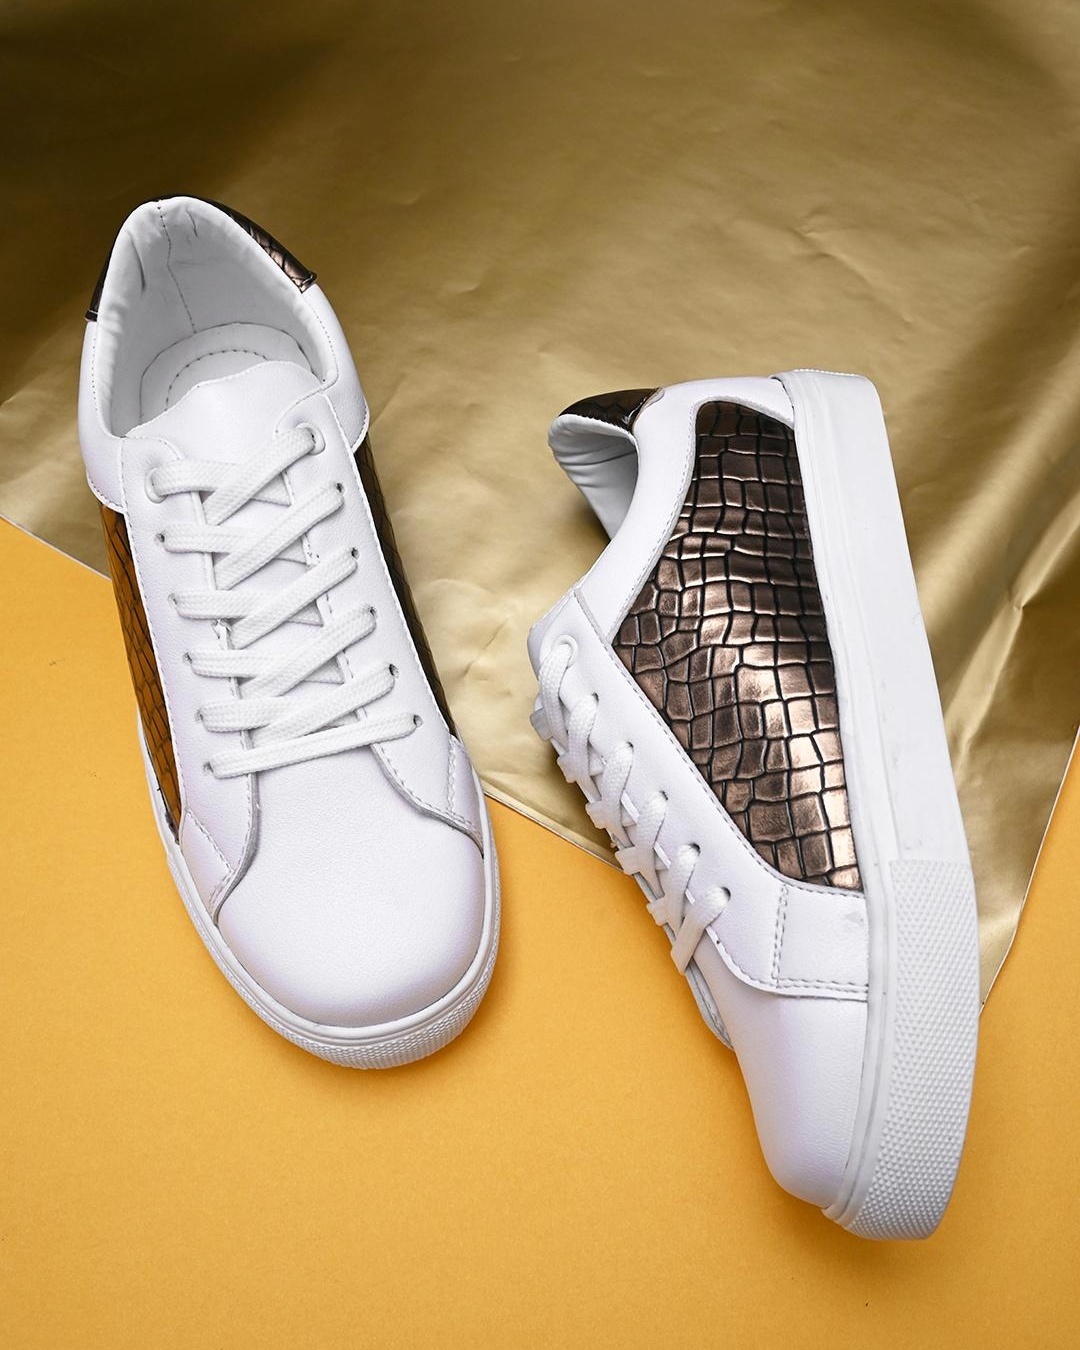 Buy Women's White and Gold Textured Casual Shoes Online in India at ...